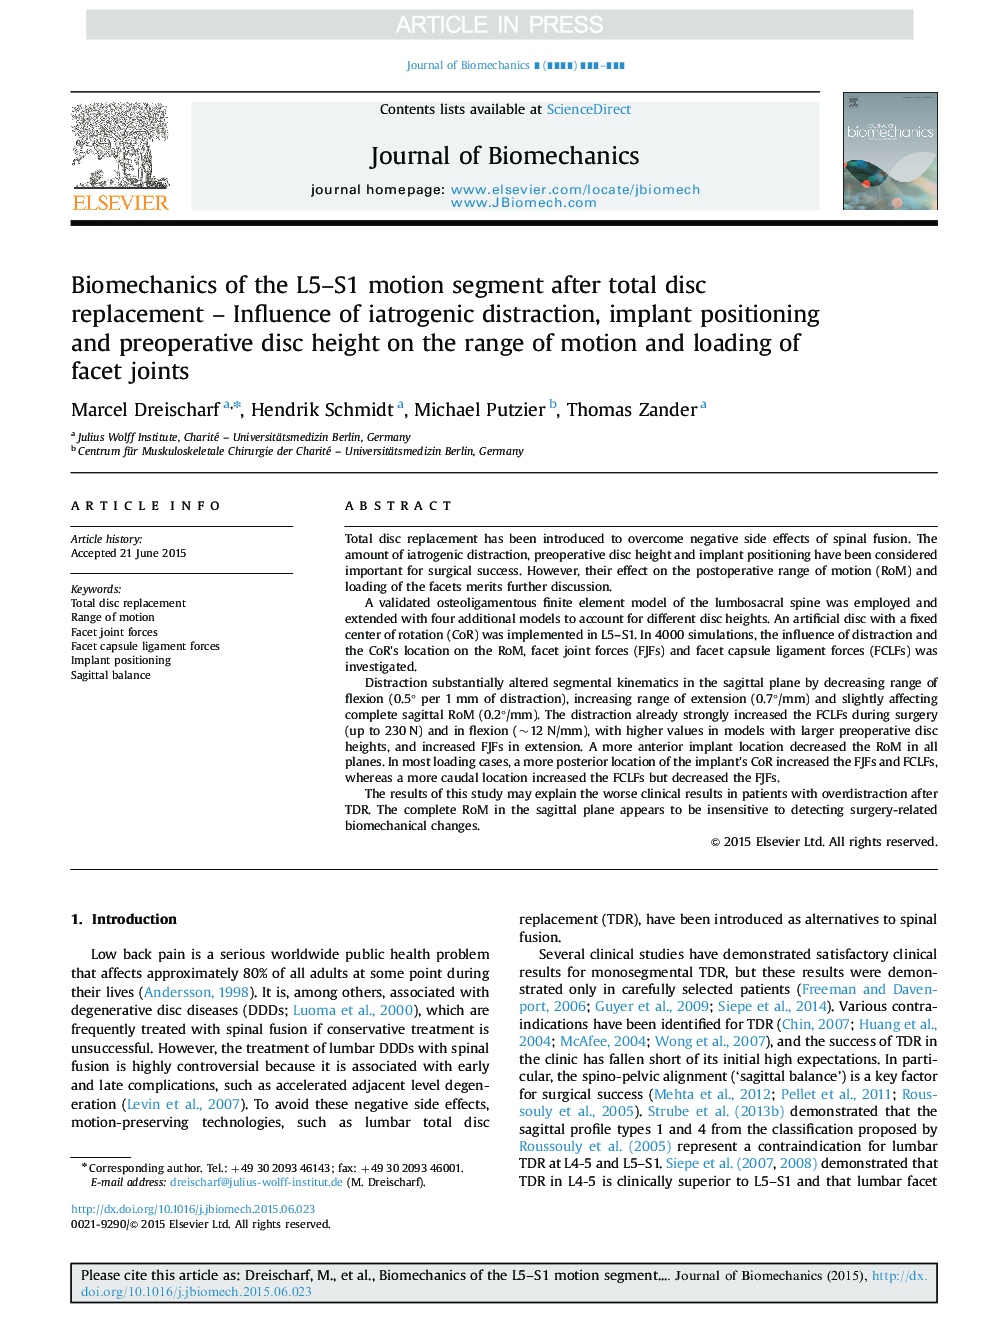 Biomechanics of the L5-S1 motion segment after total disc replacement - Influence of iatrogenic distraction, implant positioning and preoperative disc height on the range of motion and loading of facet joints